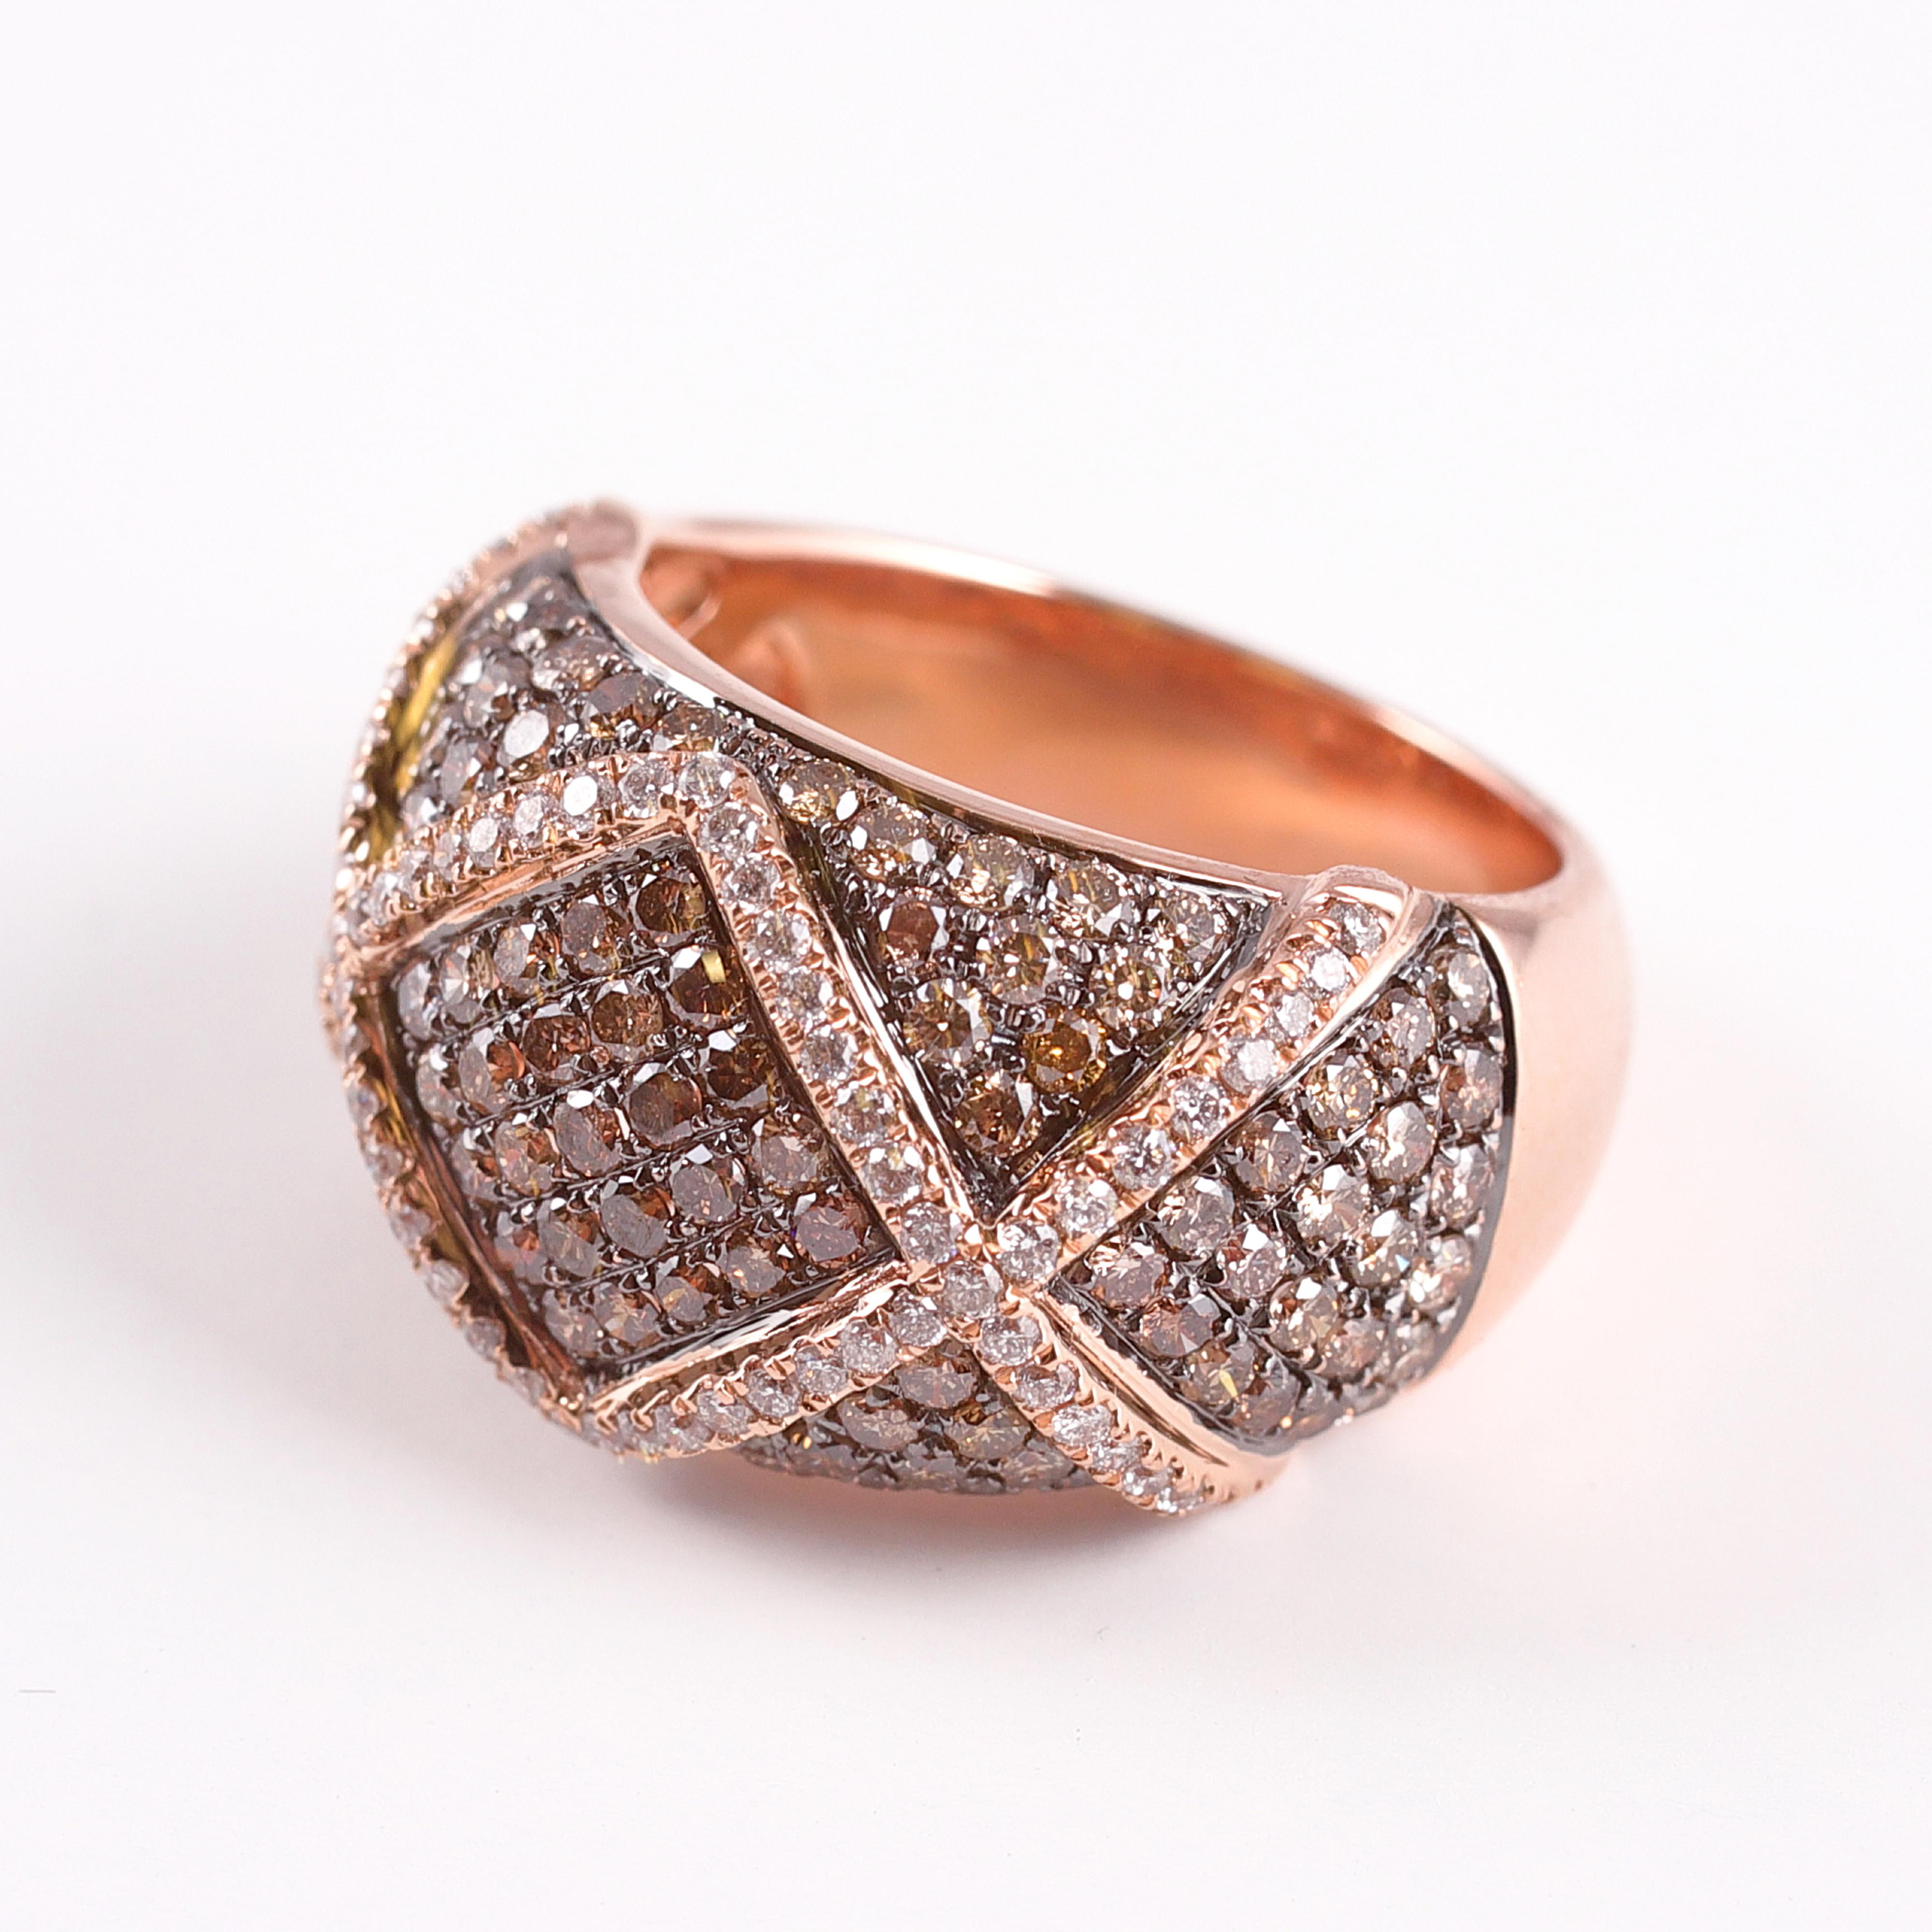 This 14 Karat Rose Gold ring boasts 1.80 carats of chocolate diamonds and 0.41 carats of white diamonds.  The white diamonds truly pop in the criss-cross setting by Adamor.  Size 7 1/4. 